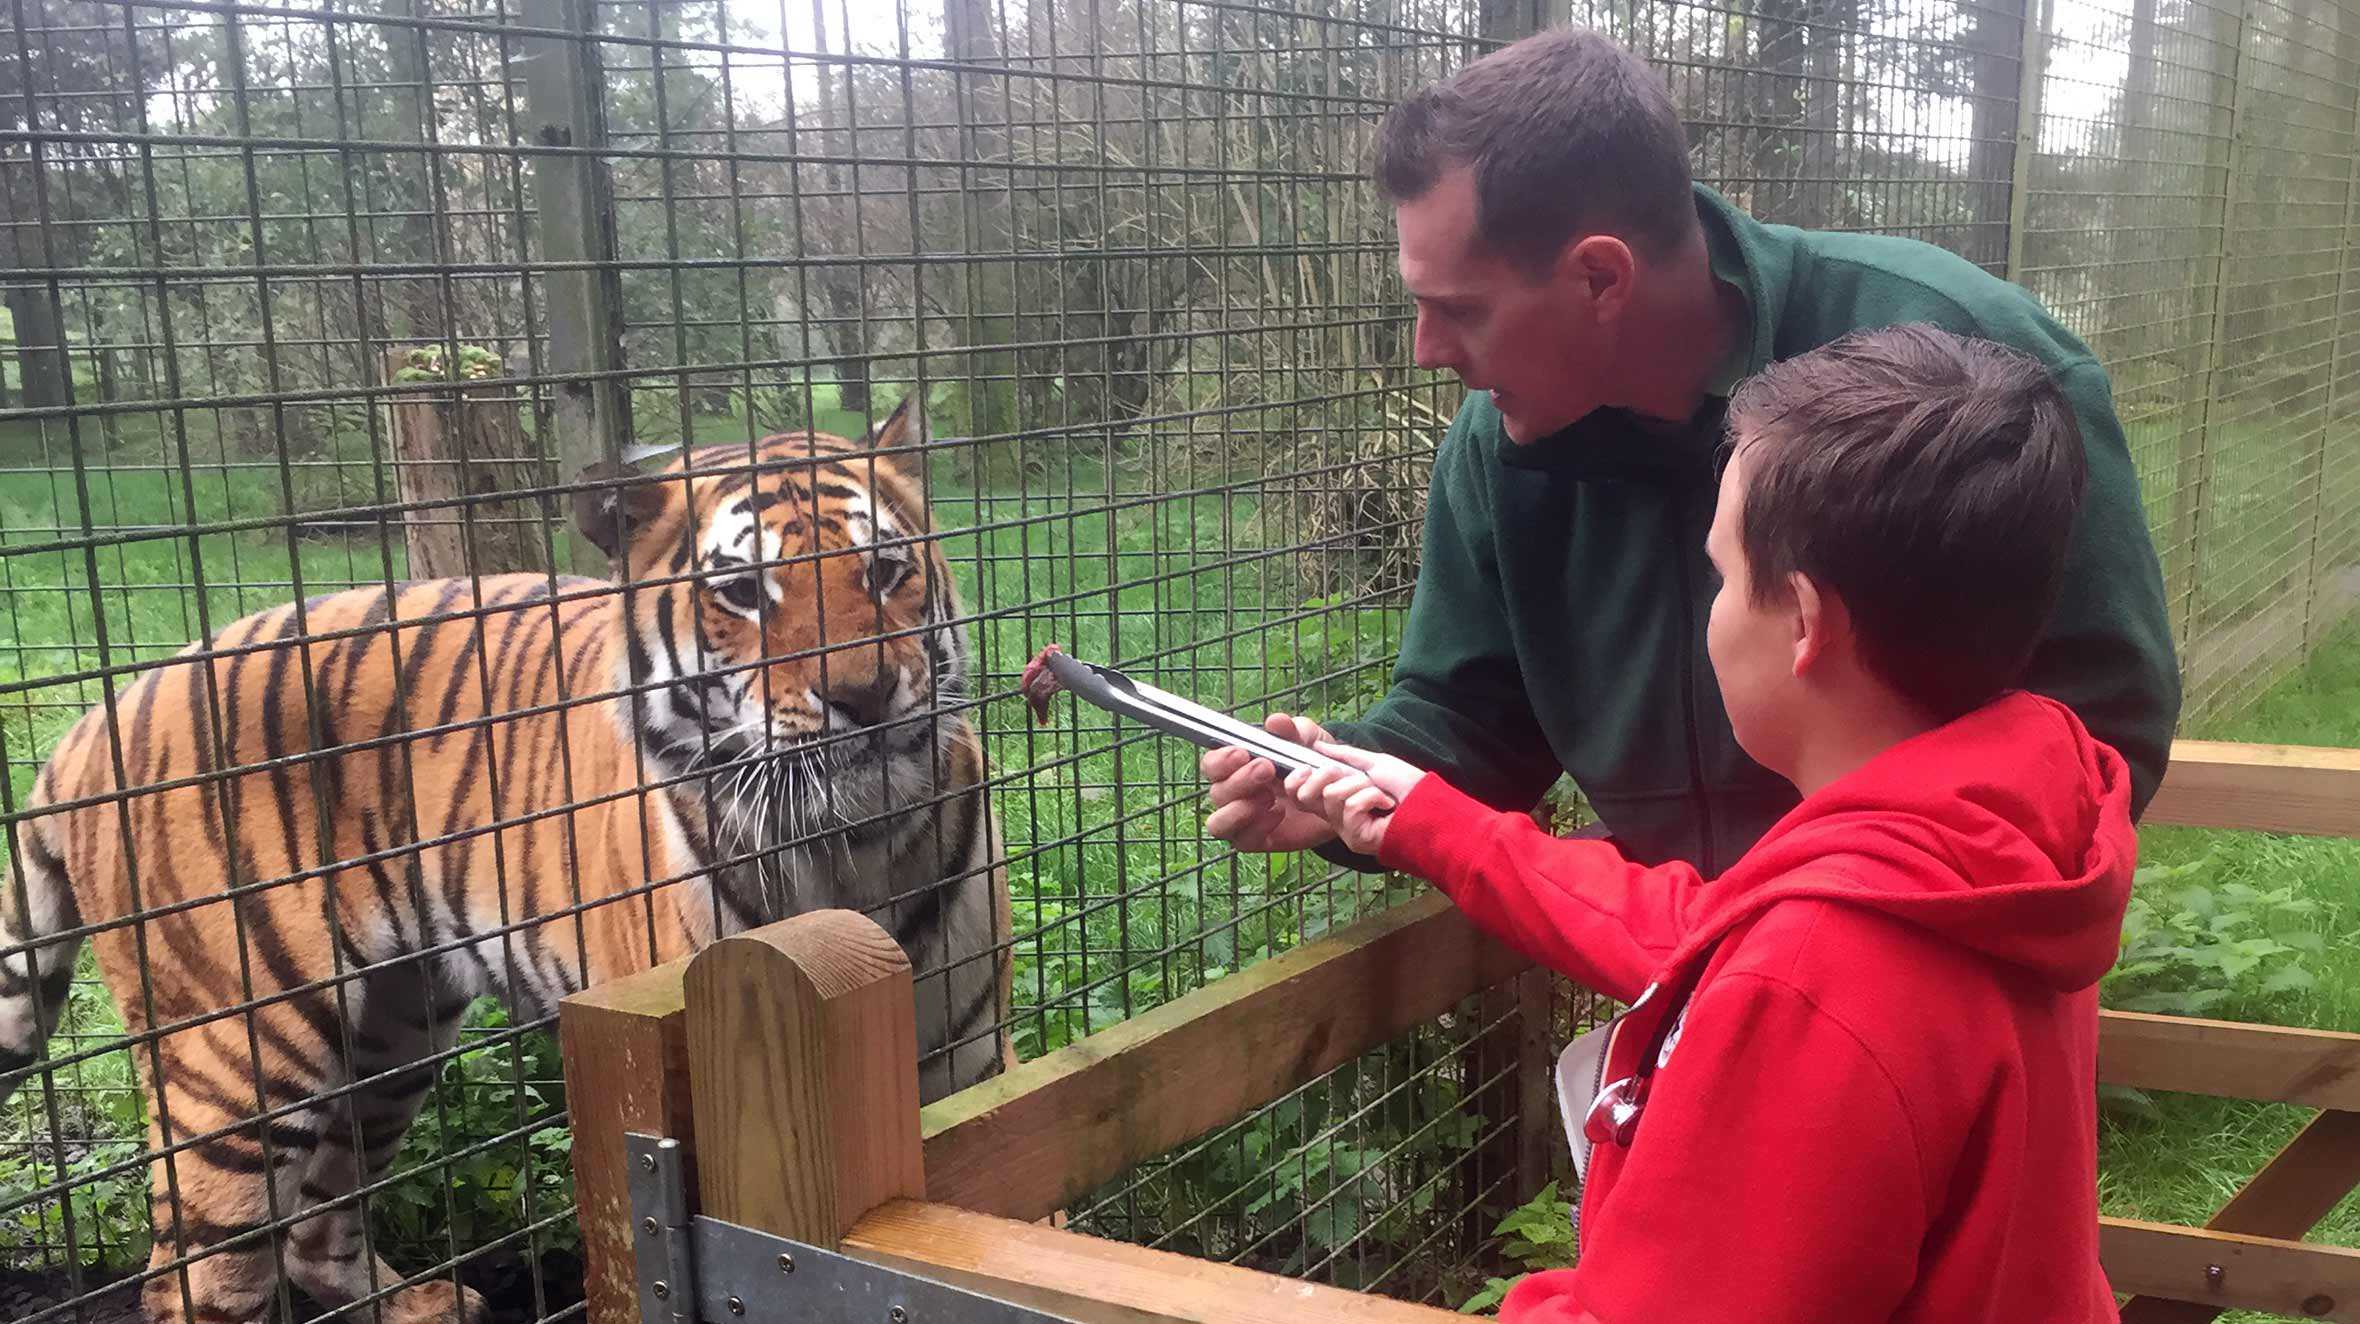 Harrison and a member of the zoo's staff feeding a piece of meat to a tiger.